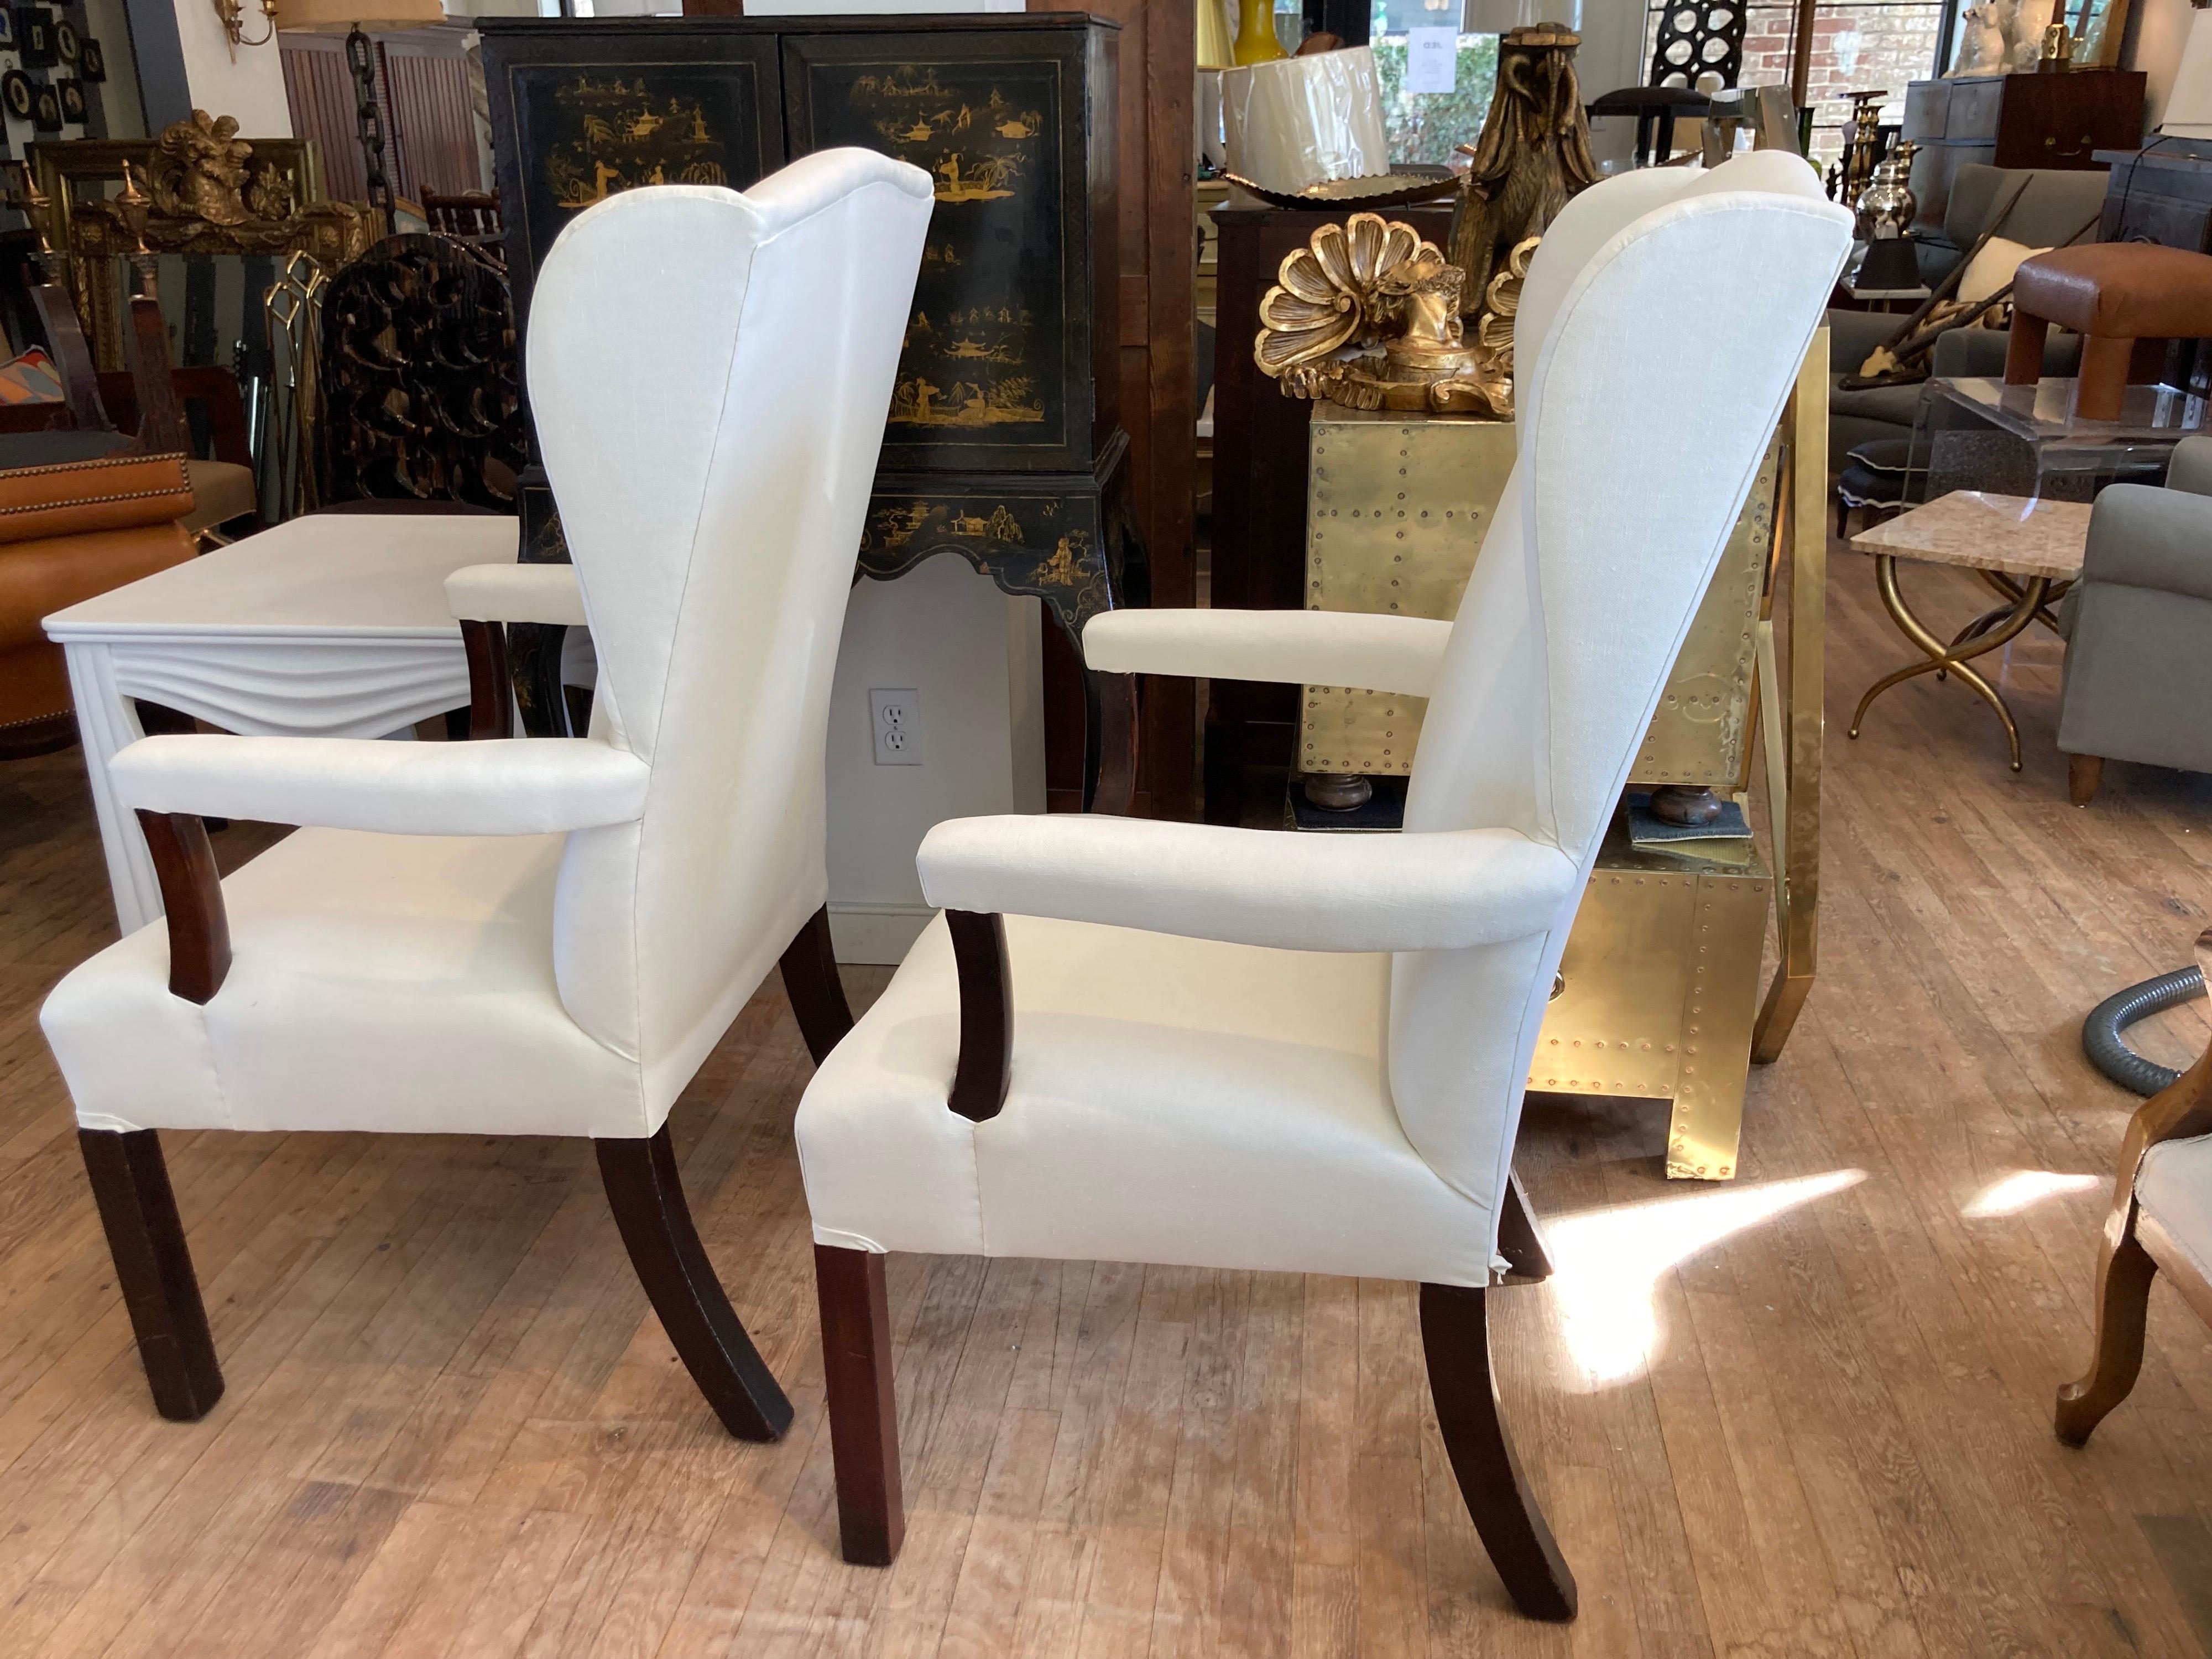 A great pair of open arm antique wingback chairs newly reupholstered in white linen.